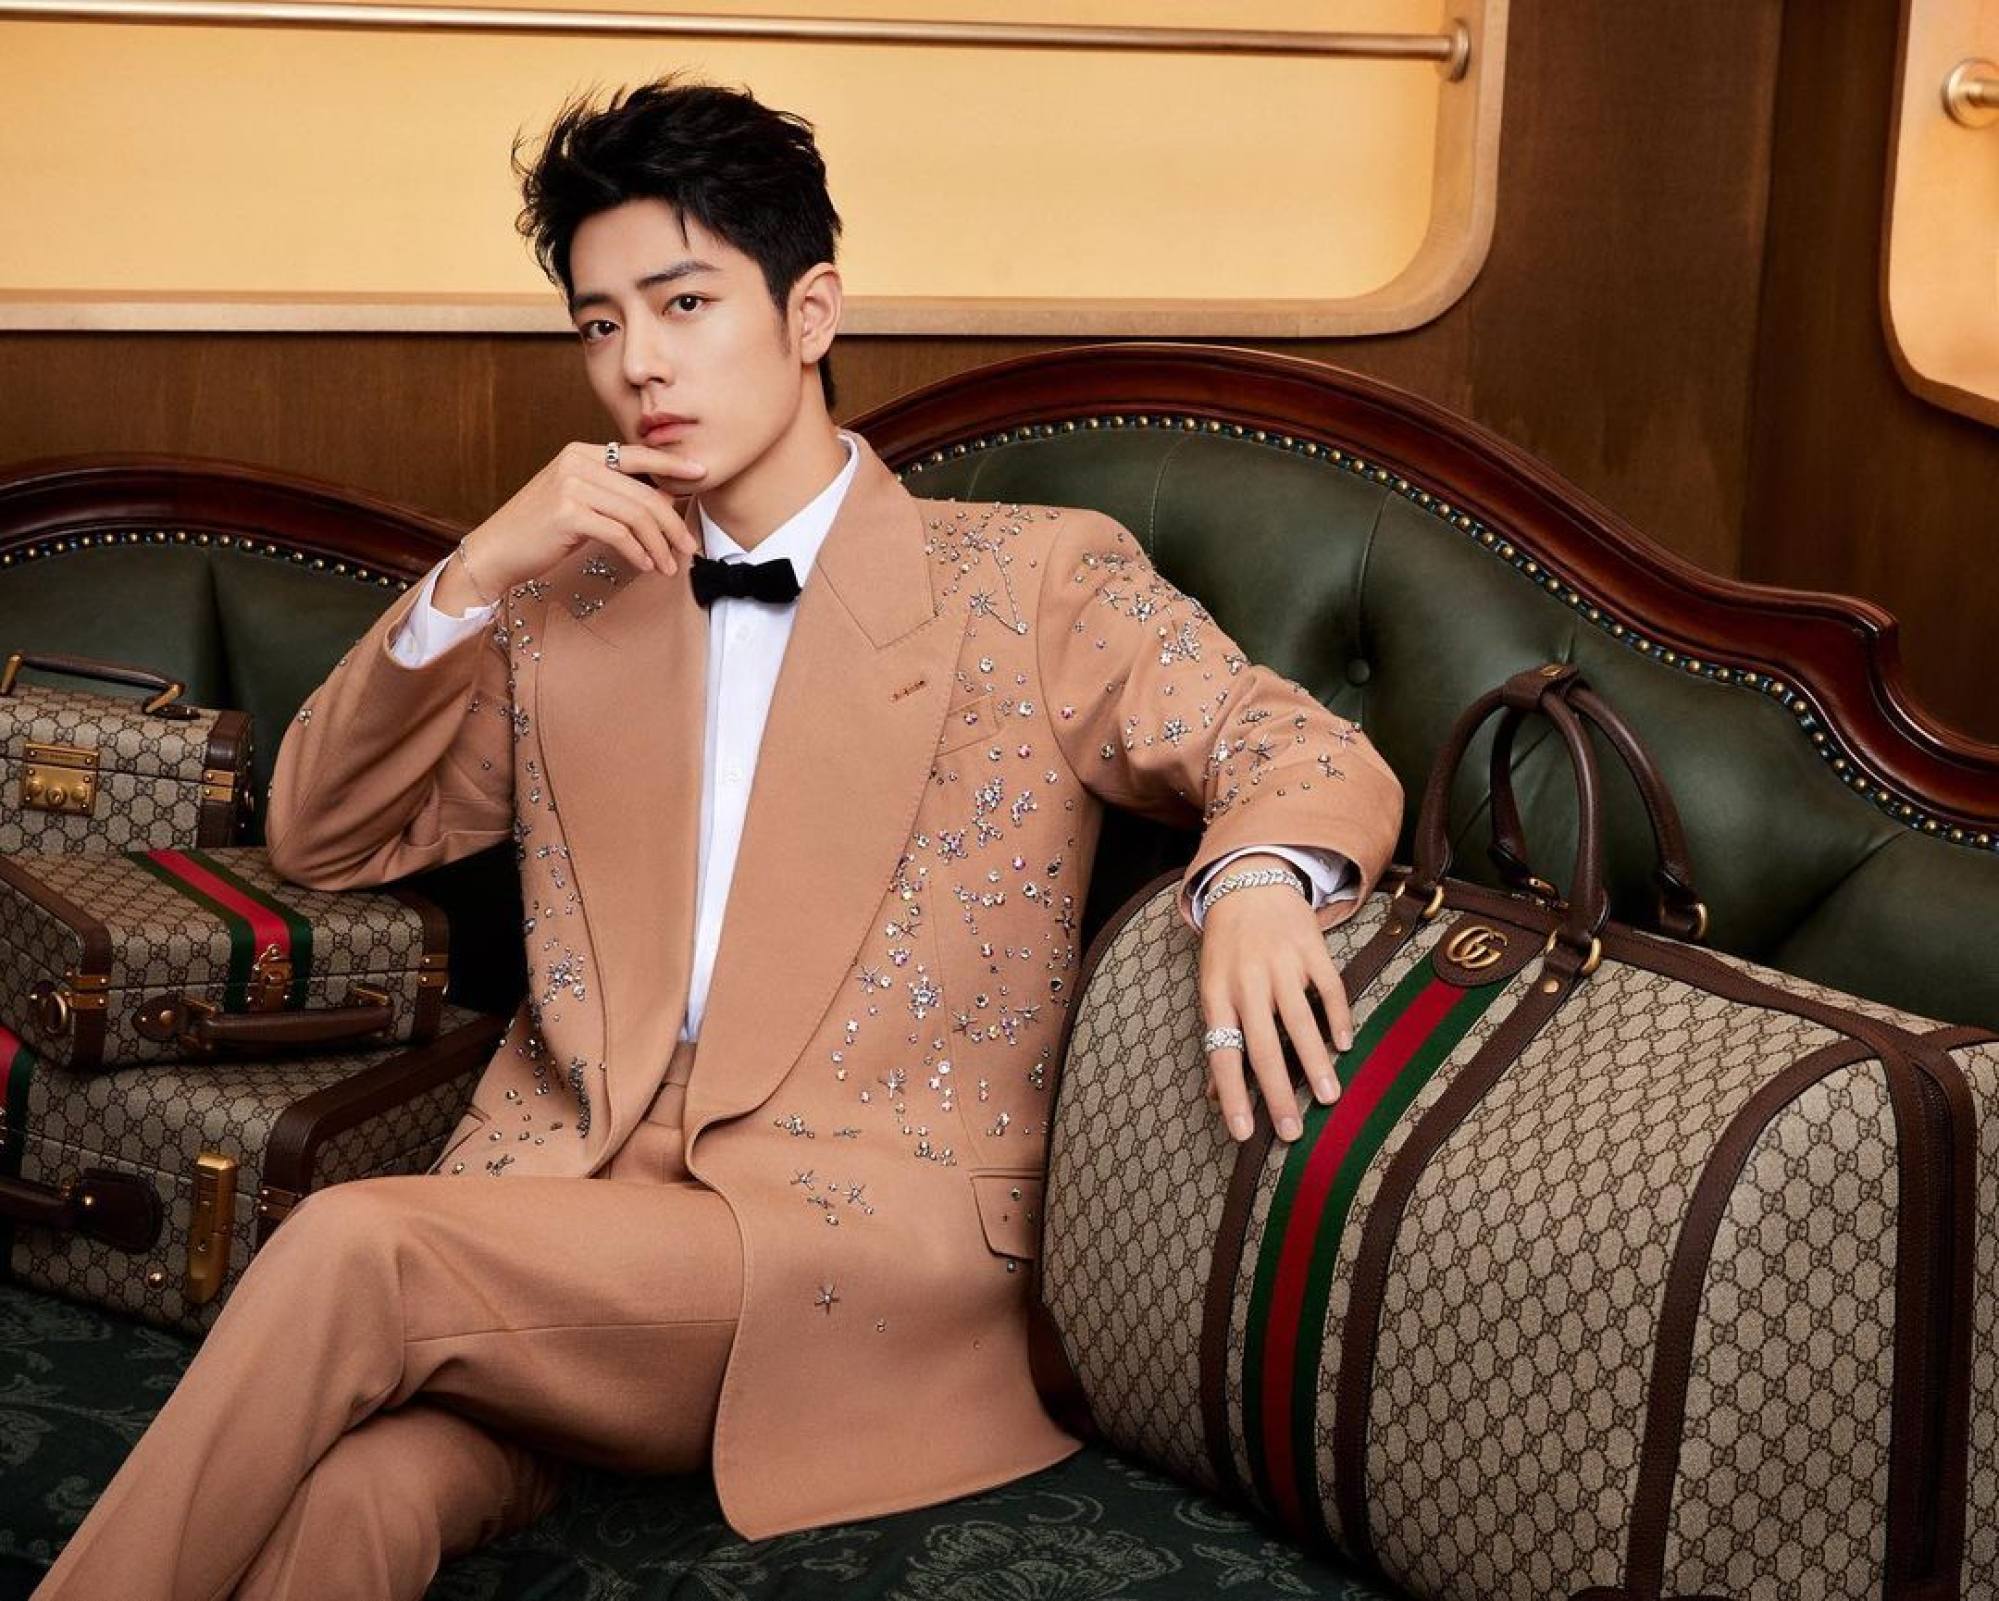 Gucci Taps Xiao Zhan as Brand Ambassador to Boost Sales in China – WWD